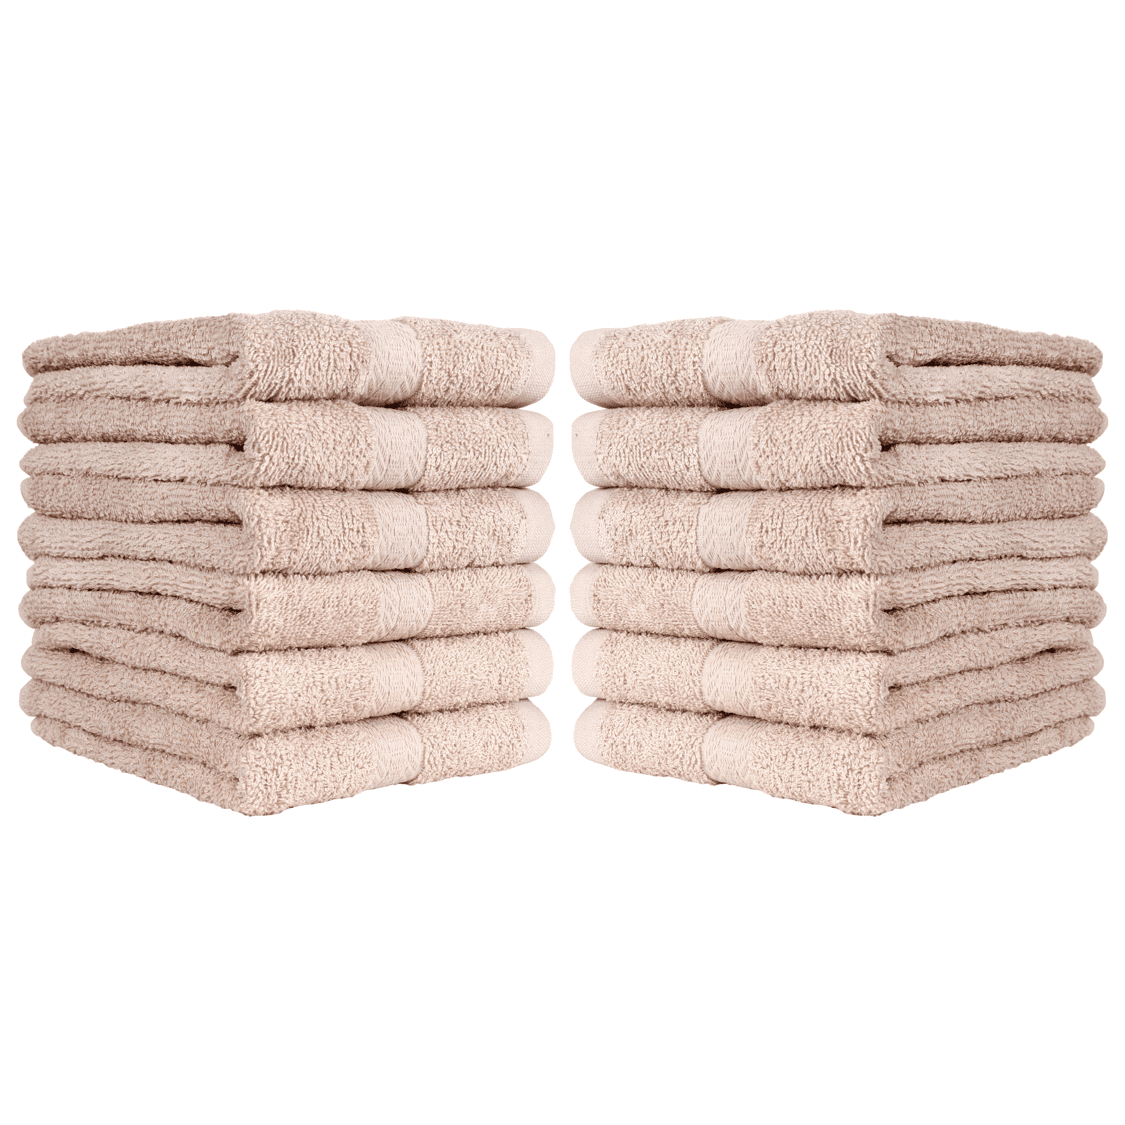 12 Pack of Bathroom Hand Towels 100% Ring-Spun Cotton 16 x 27 Color Options 